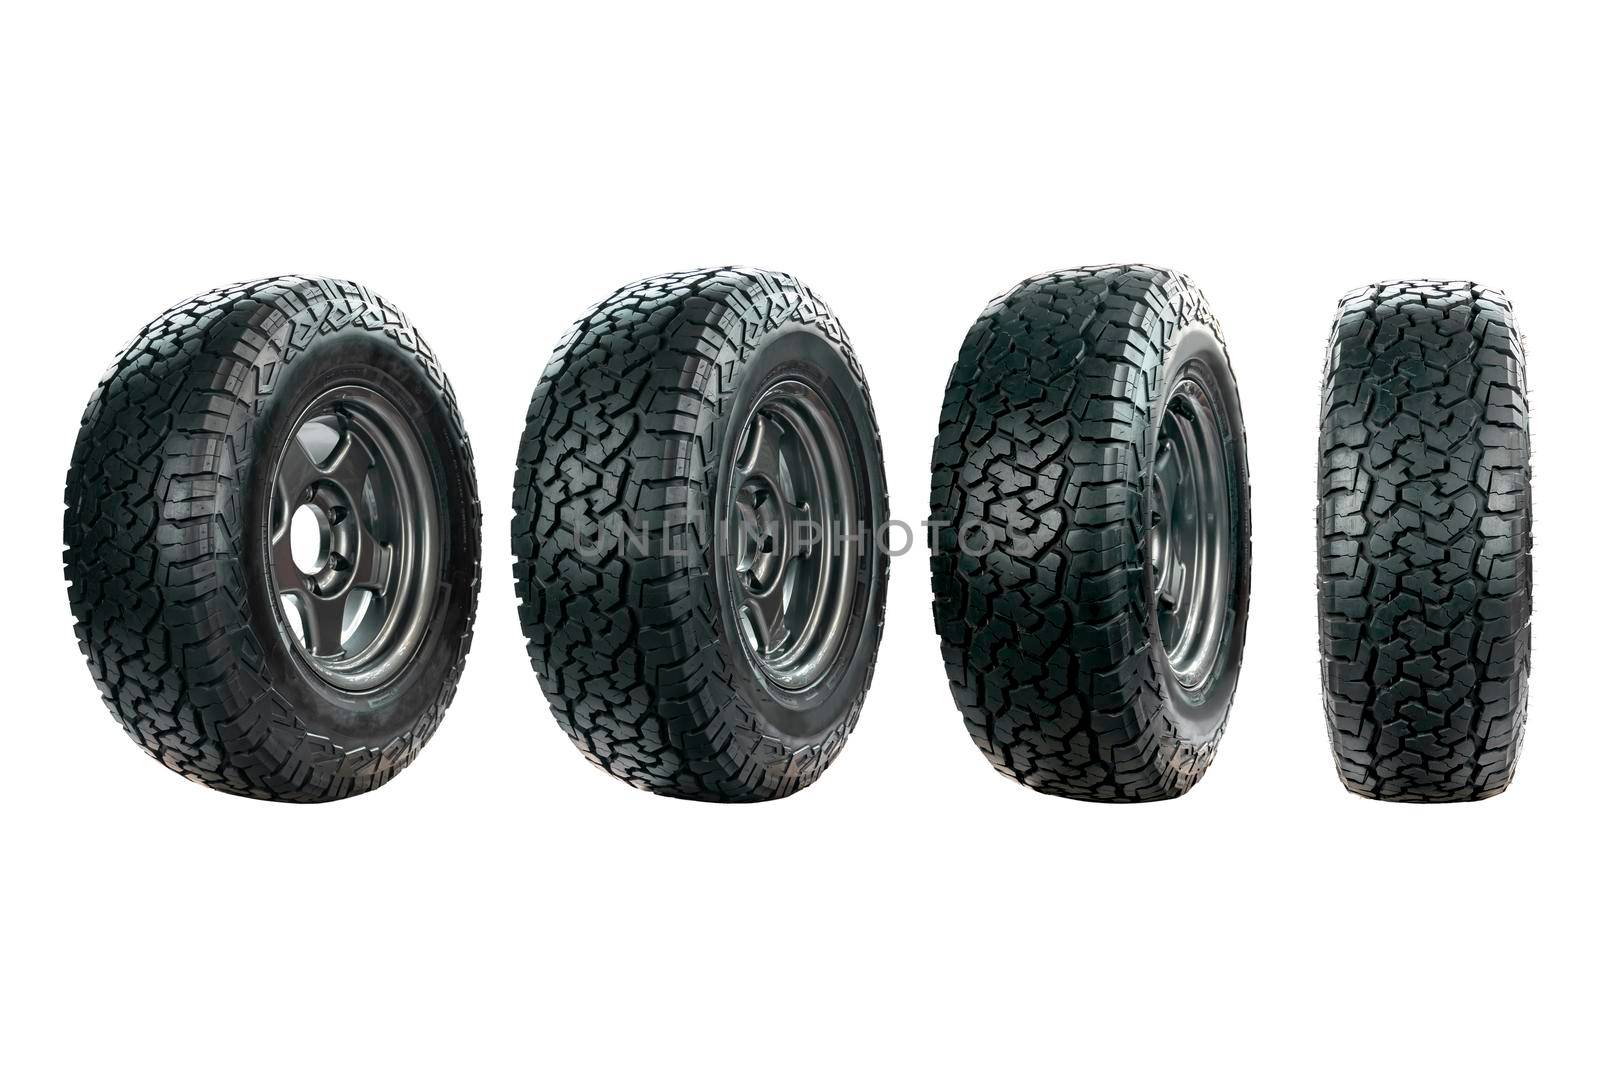 Group of car tire designed for use in all road conditions with alloy wheel isolated on white background.